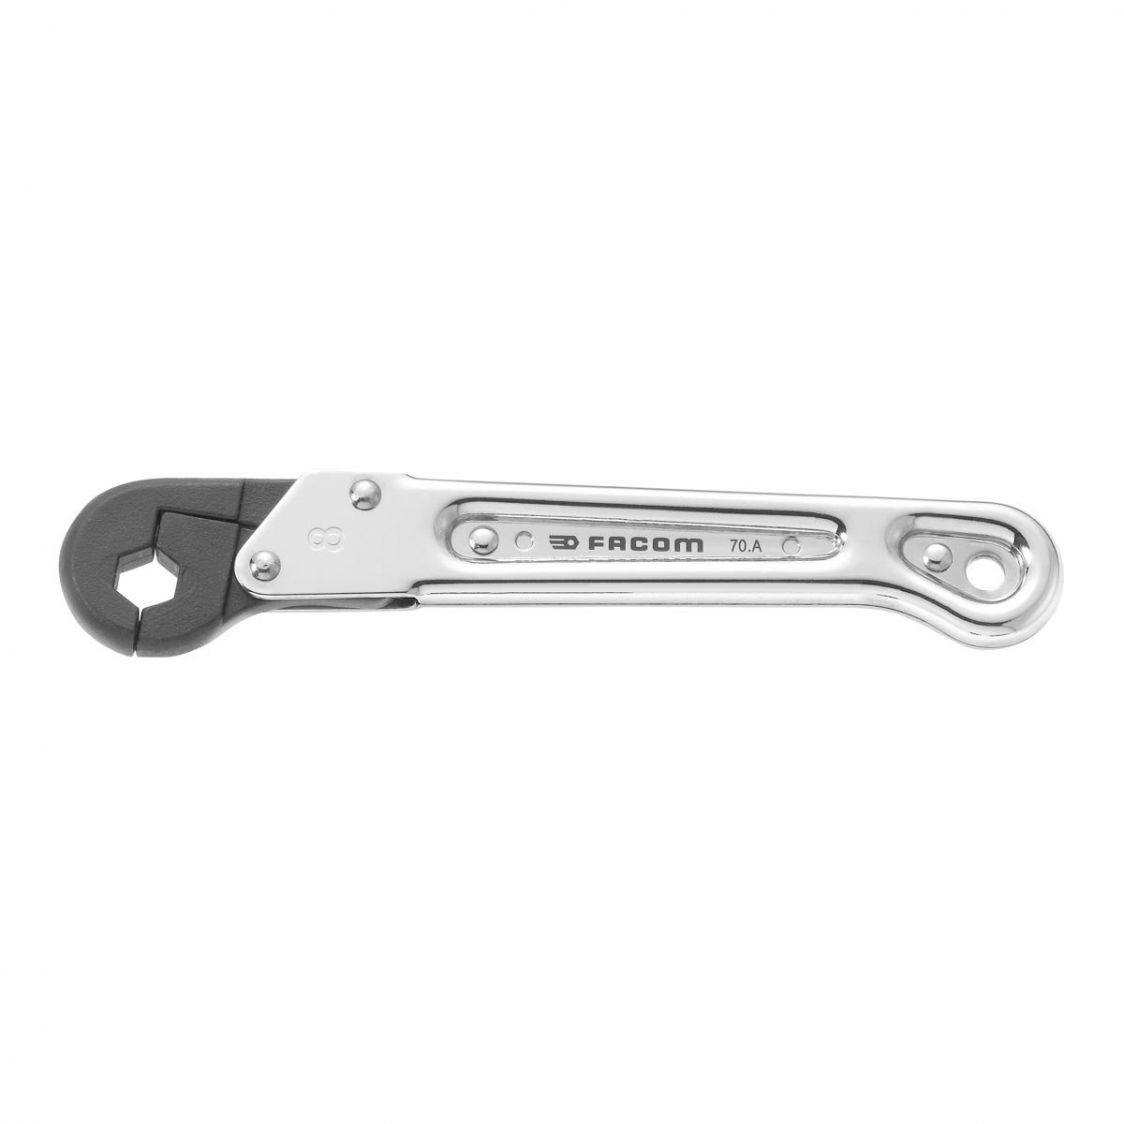 FACOM 70A.14 - 14mm Metric Ratchet Flare Nut Spanner